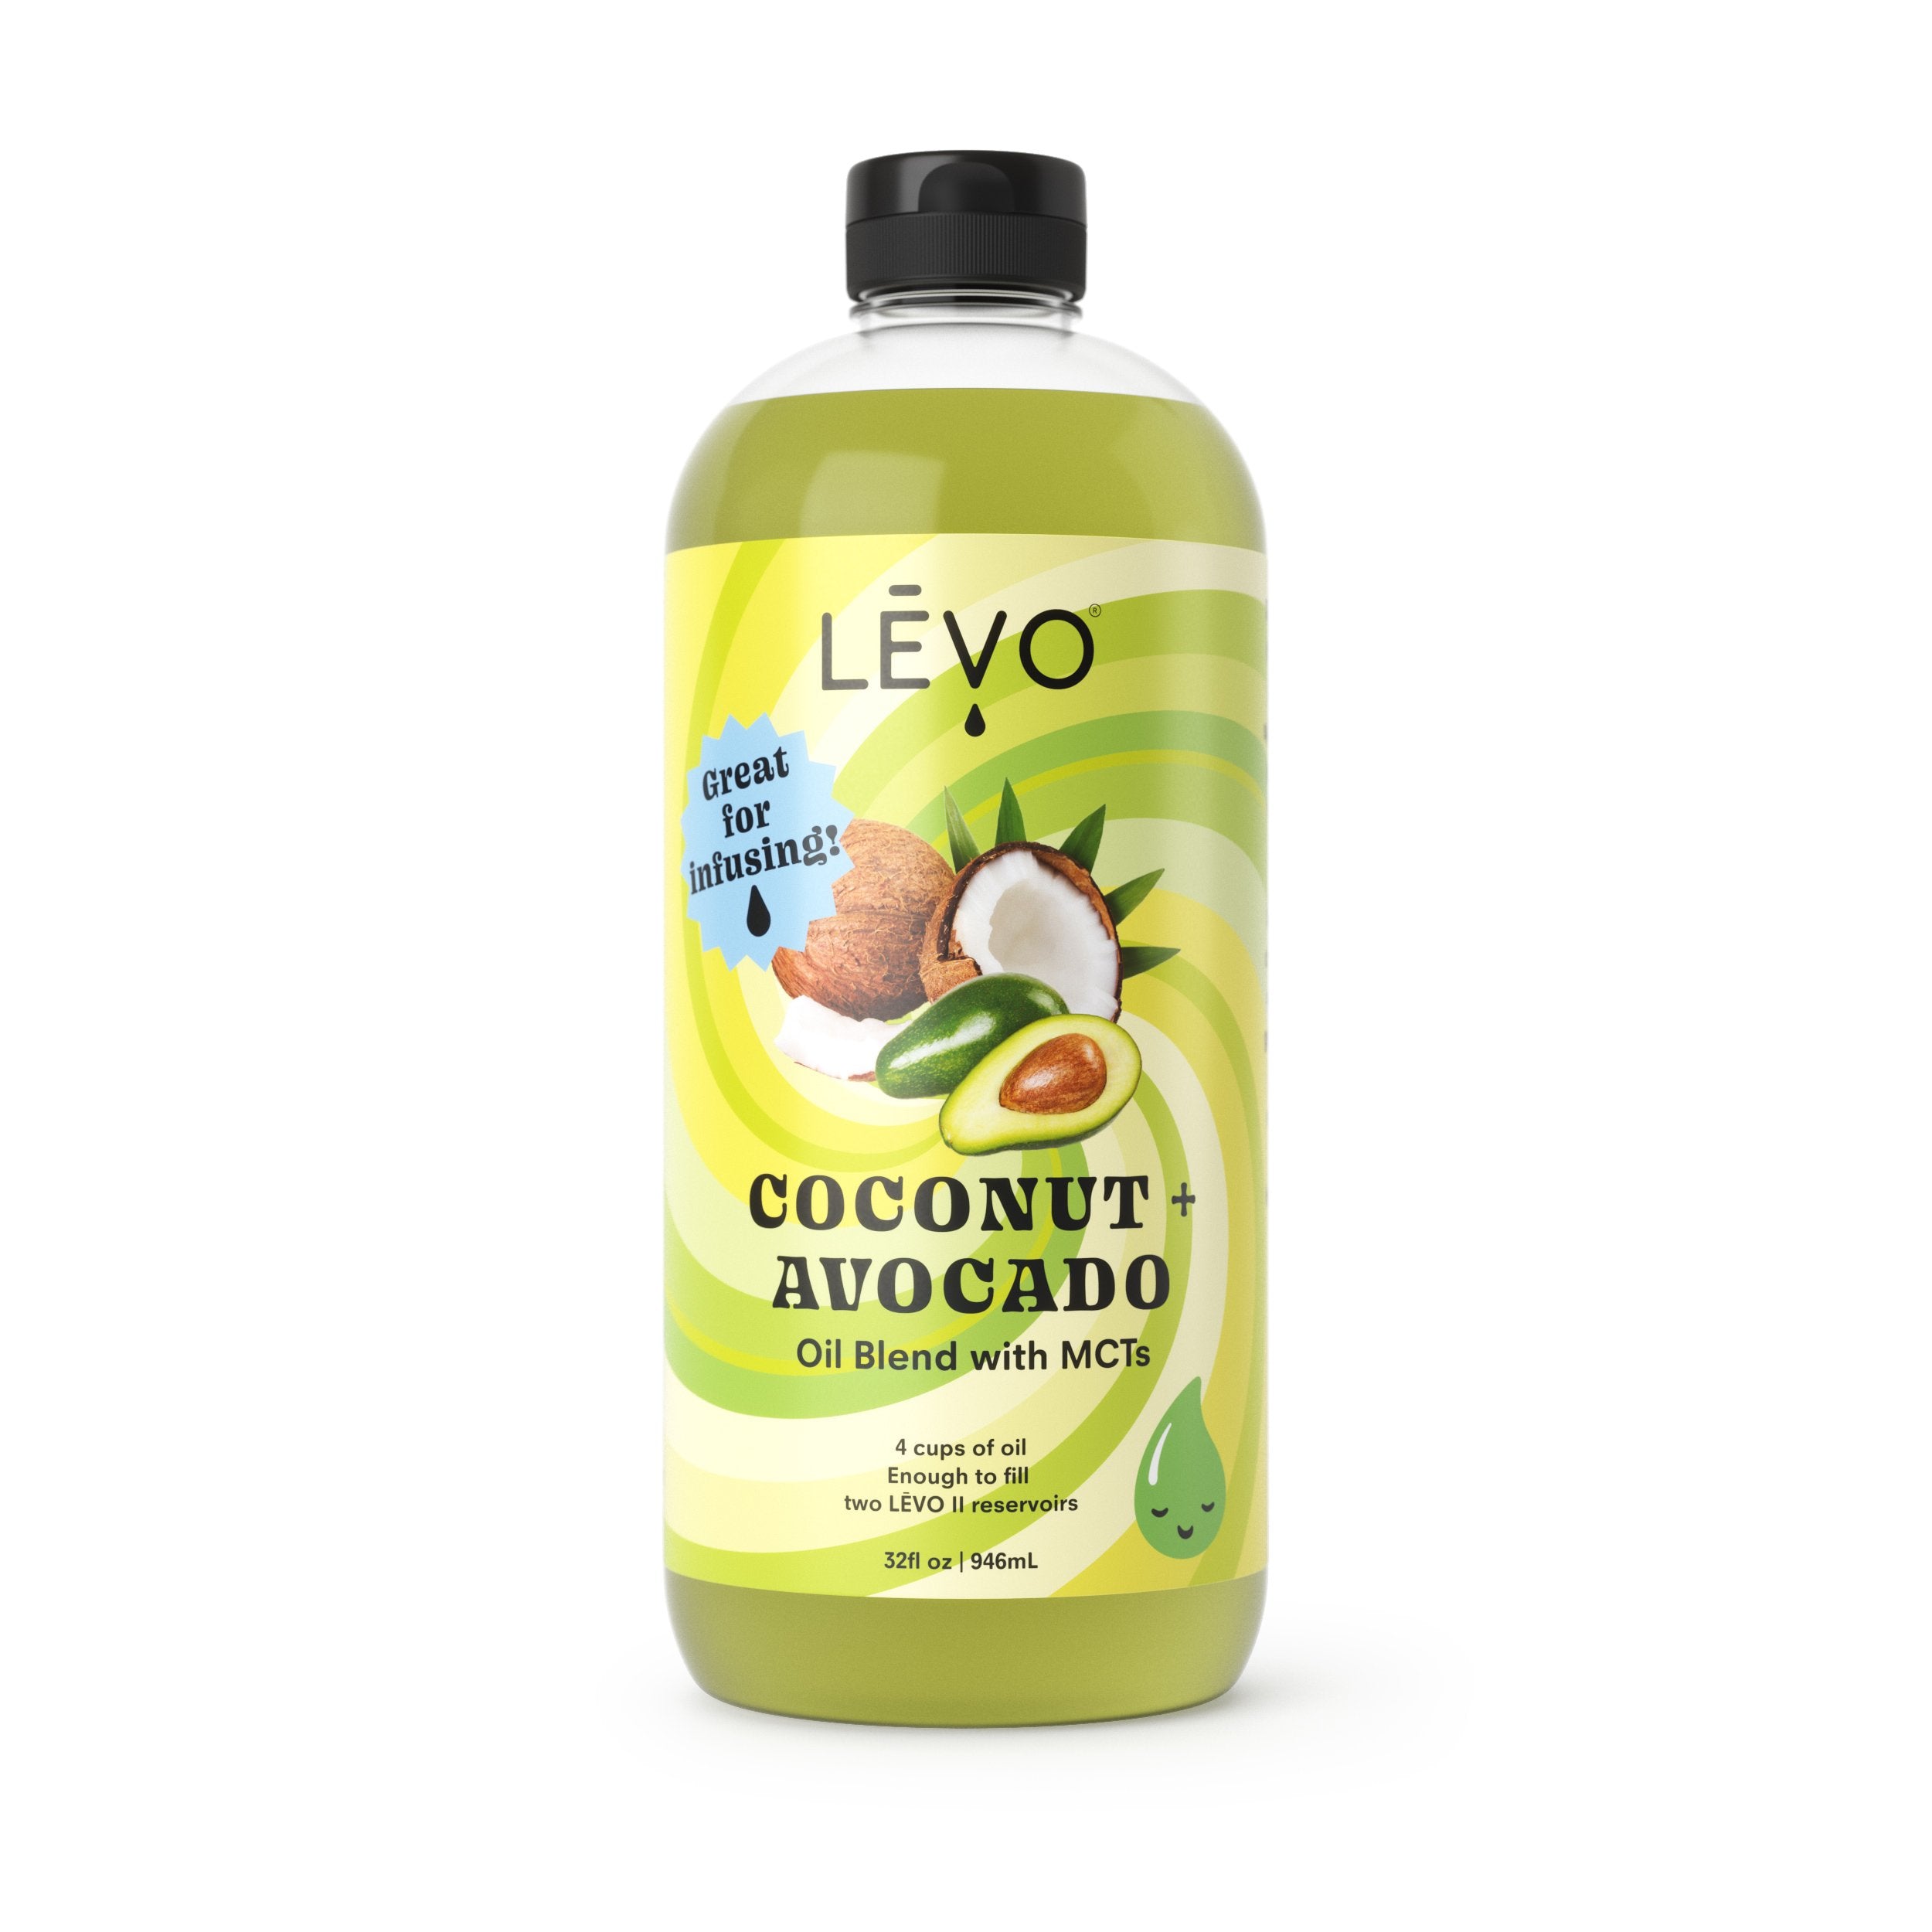 LEVO is your one stop shop for your favorite infusion machine, LEVO II, and the best high quality oils to use with your machine. Try this Coconut plus Avocado oil blend with MCTs. Great for infusing!